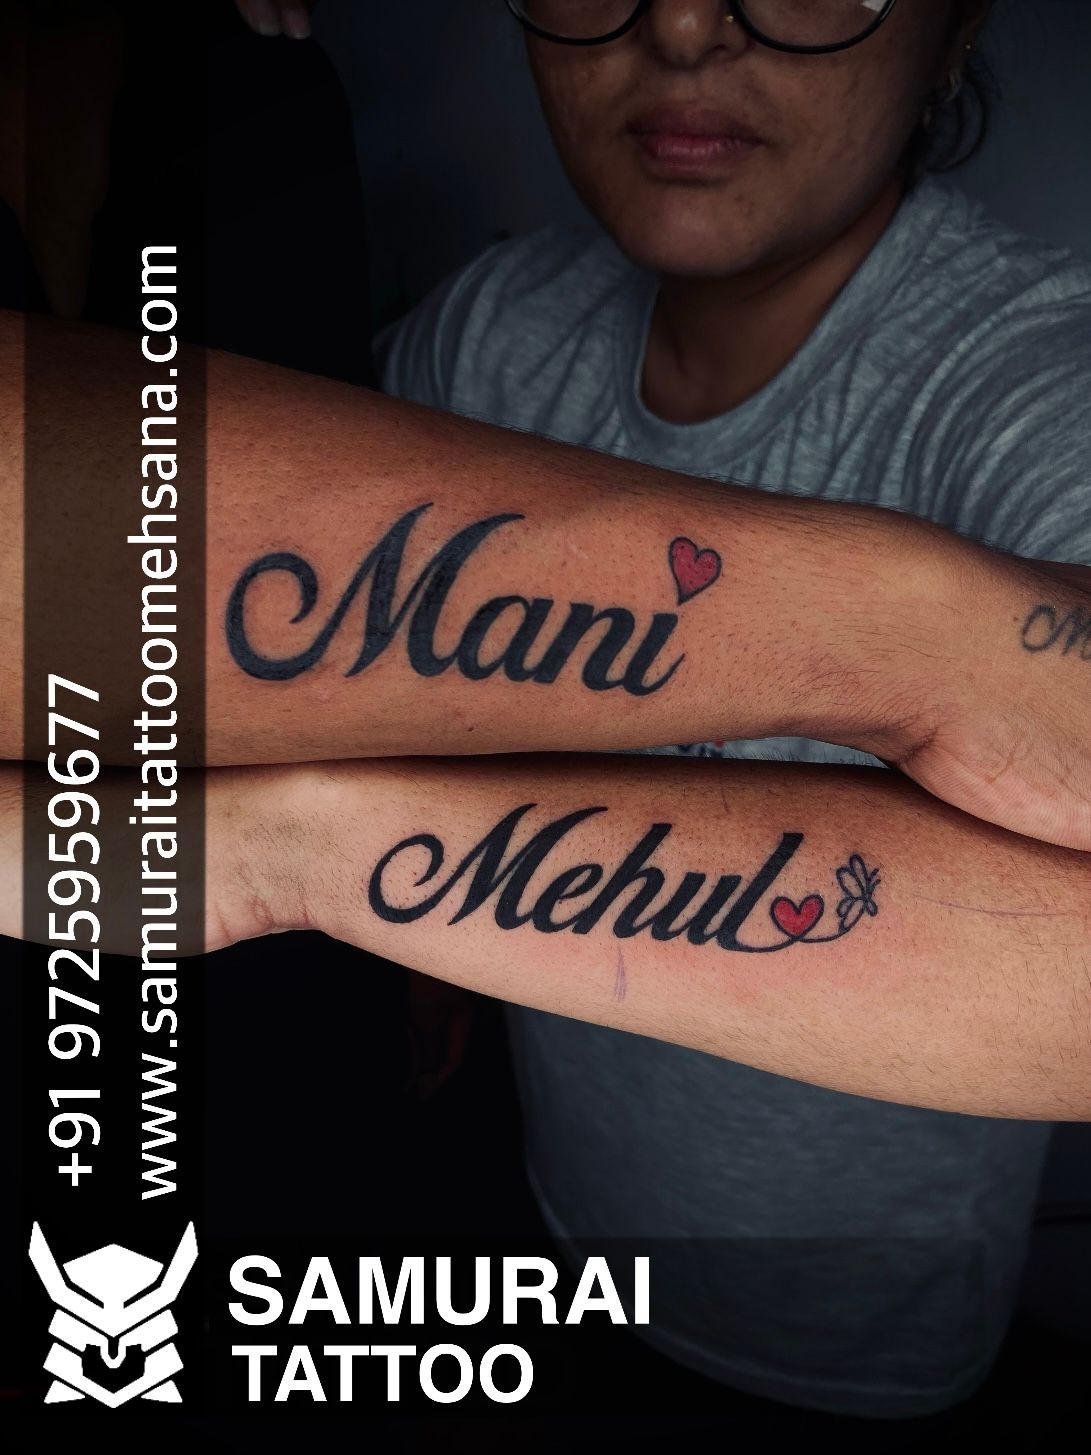 Details more than 87 tattoo combination of two names super hot  thtantai2